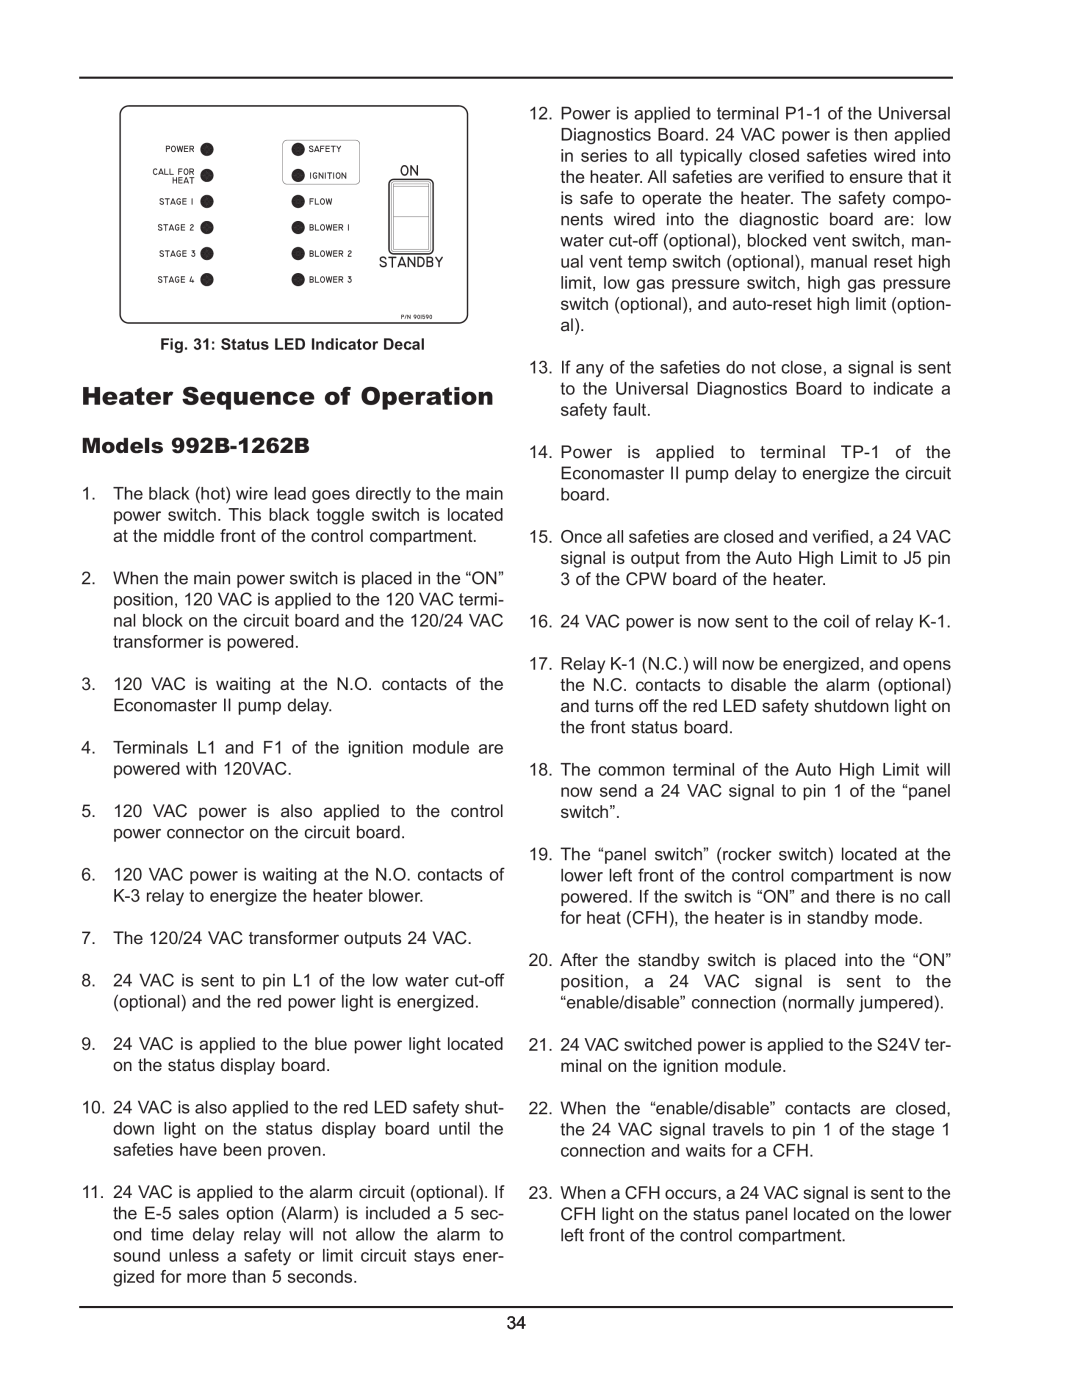 Raypak manual Heater Sequence of Operation, Models 992B-1262B 